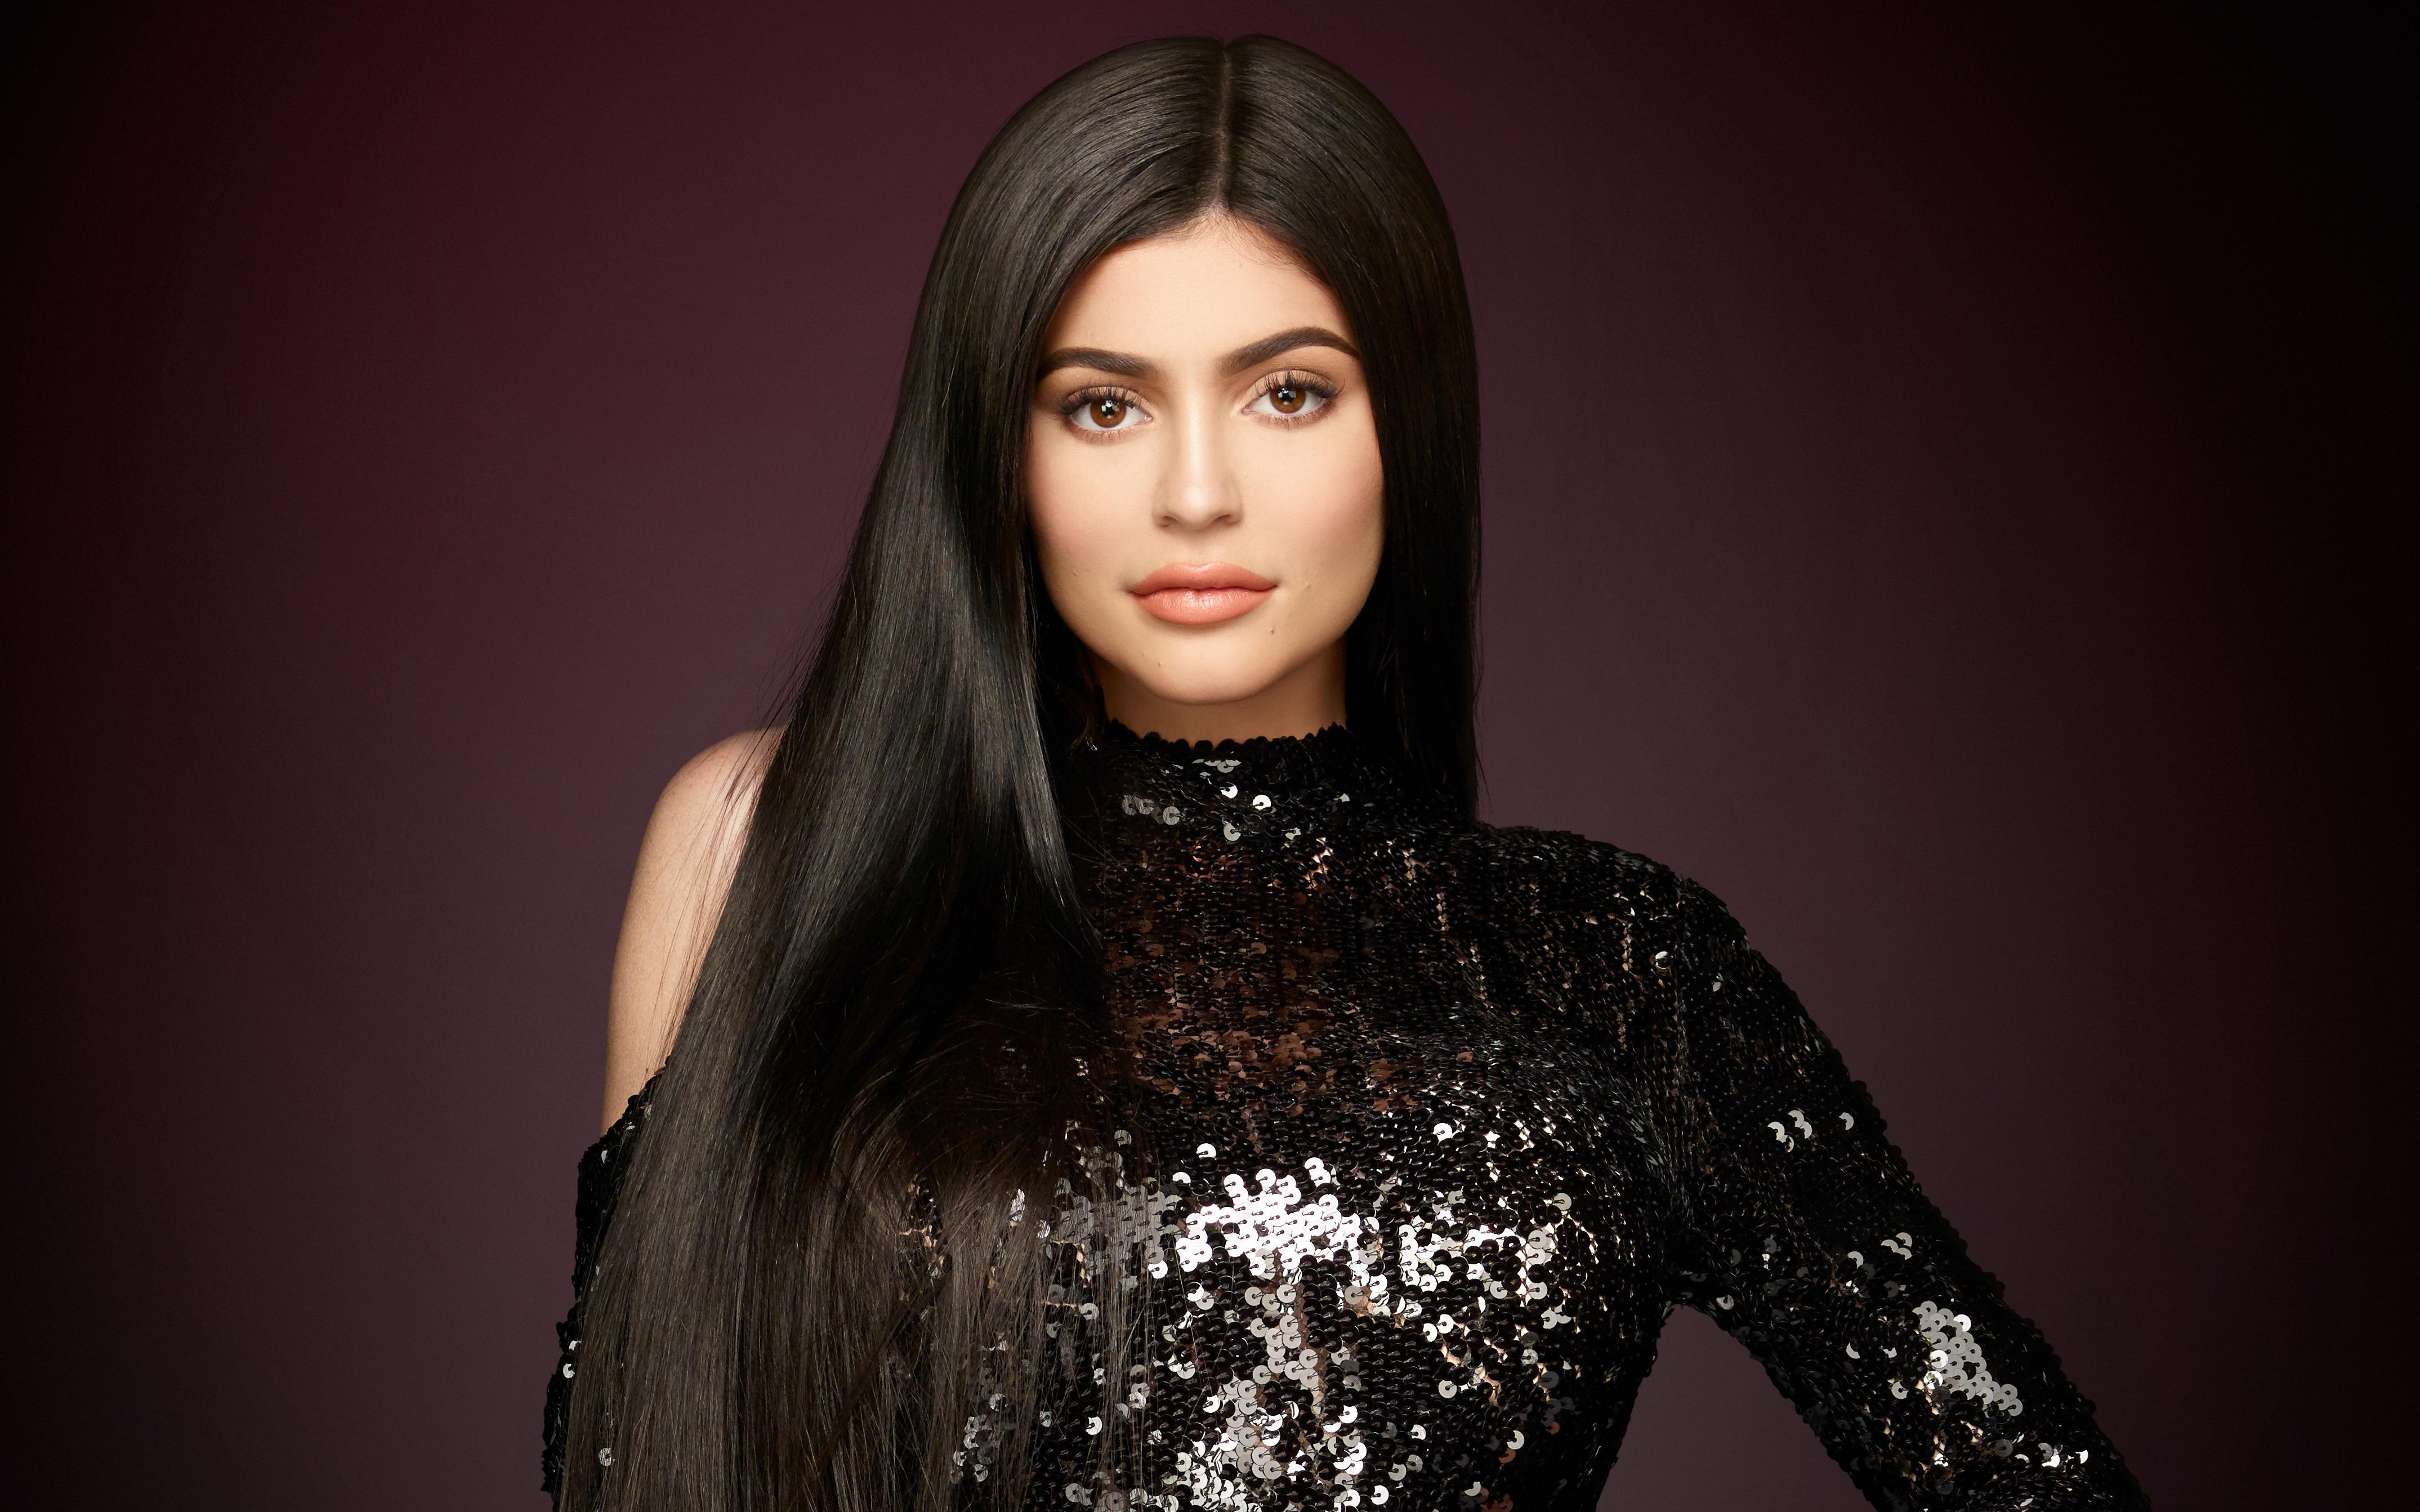 Kylie Jenner Keeping up with the Kardashians 2017 4K Wallpaper. HD